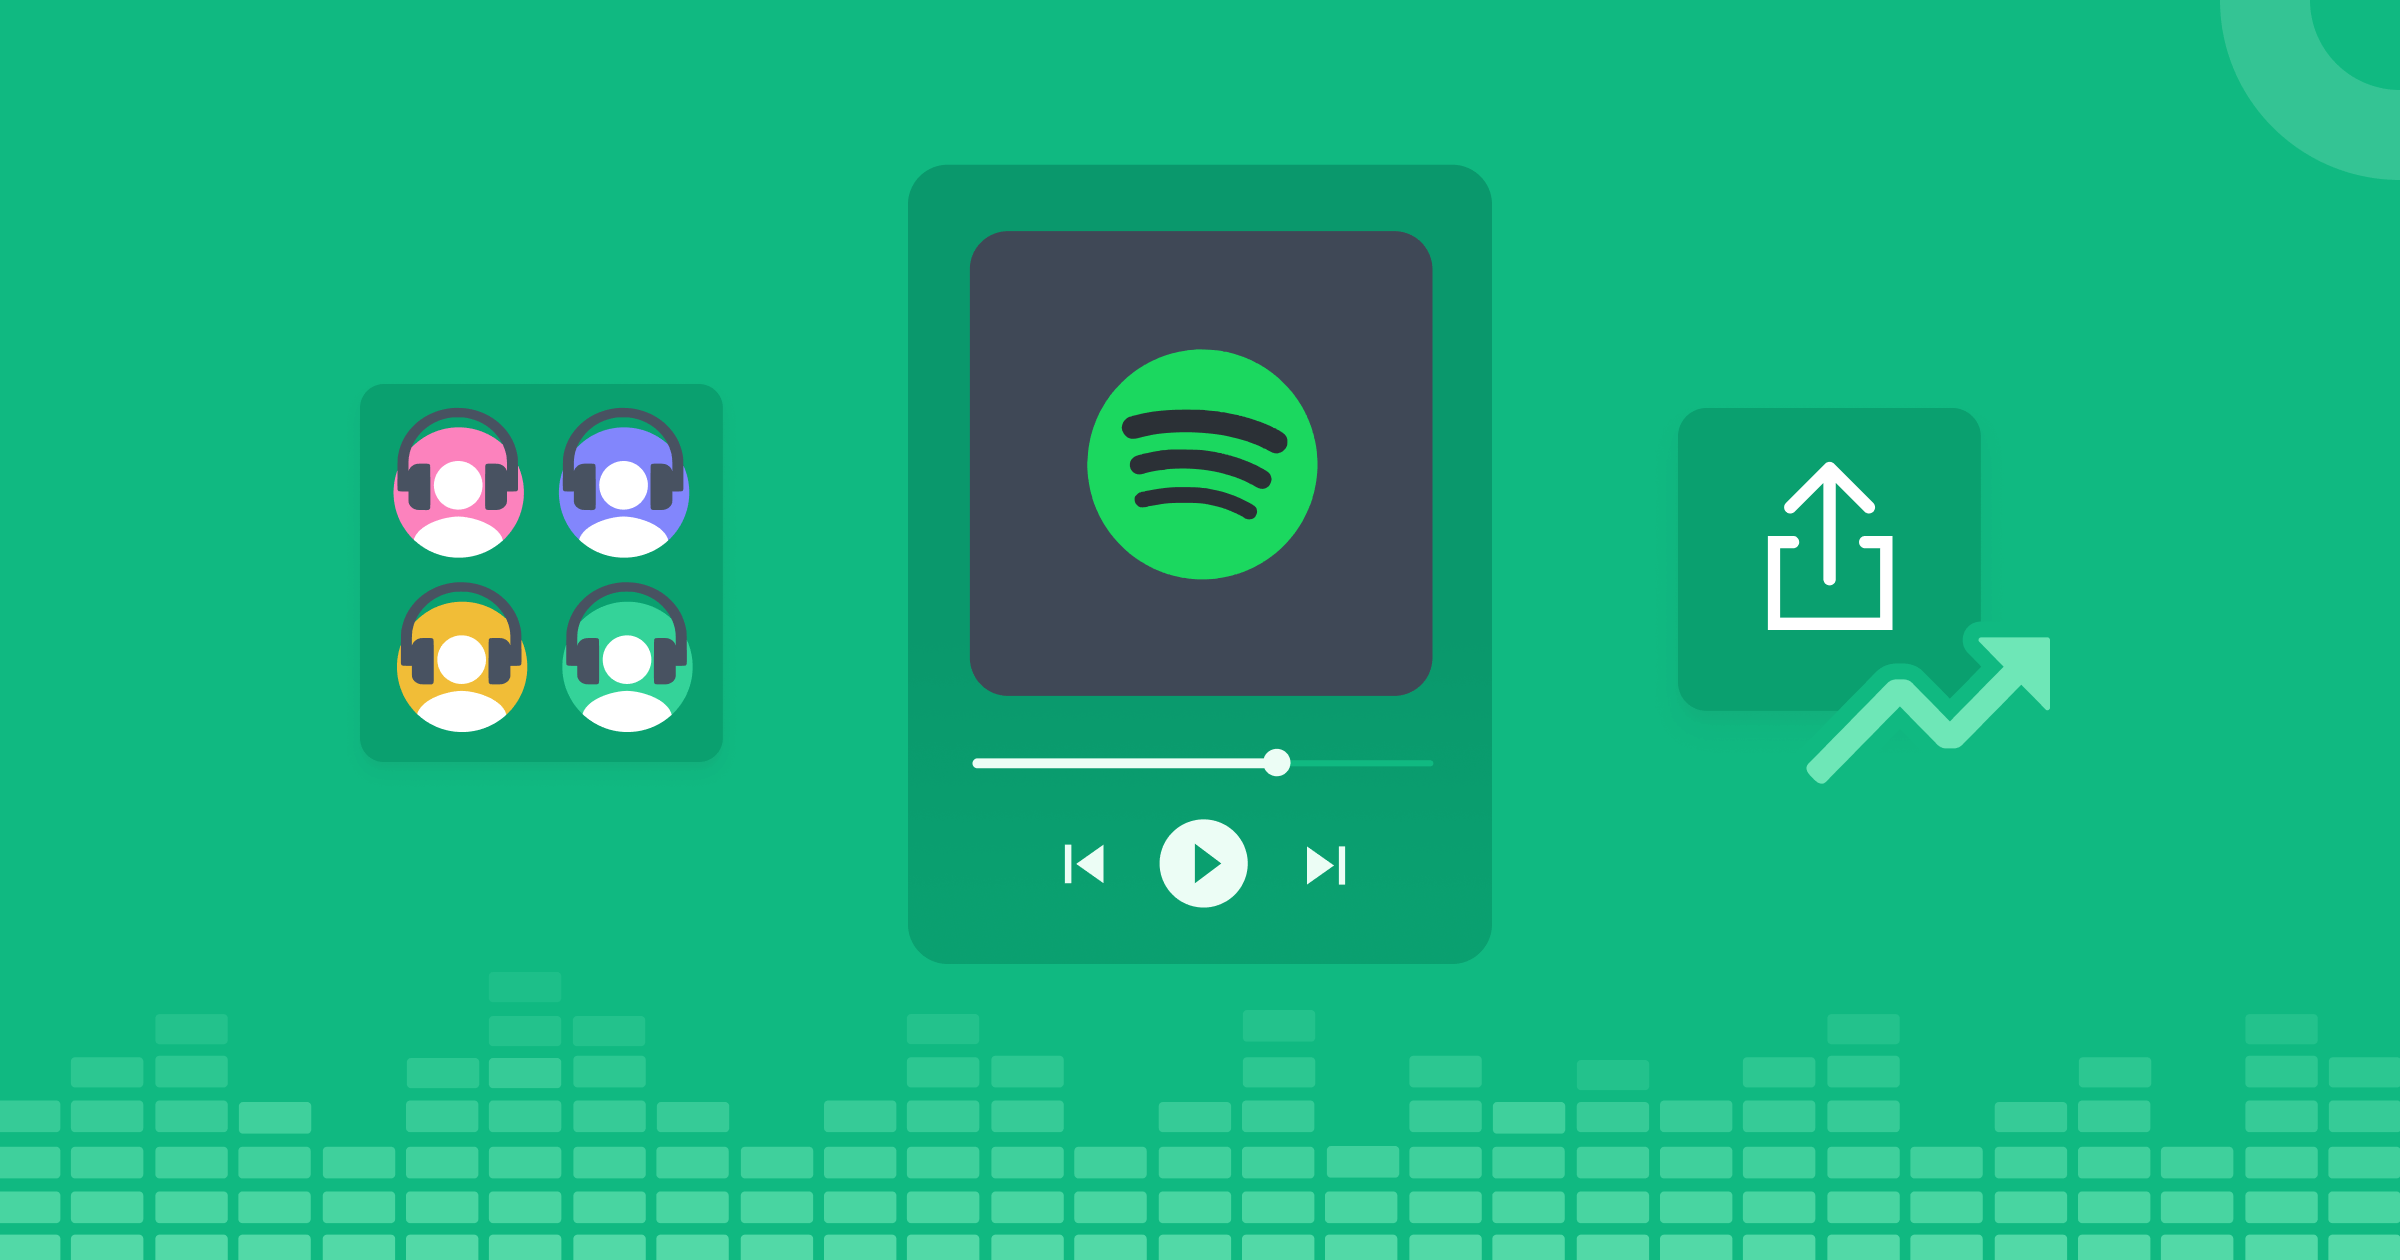 Spotify player between 4 listener icons and a graph next to the share button representing the CRO.